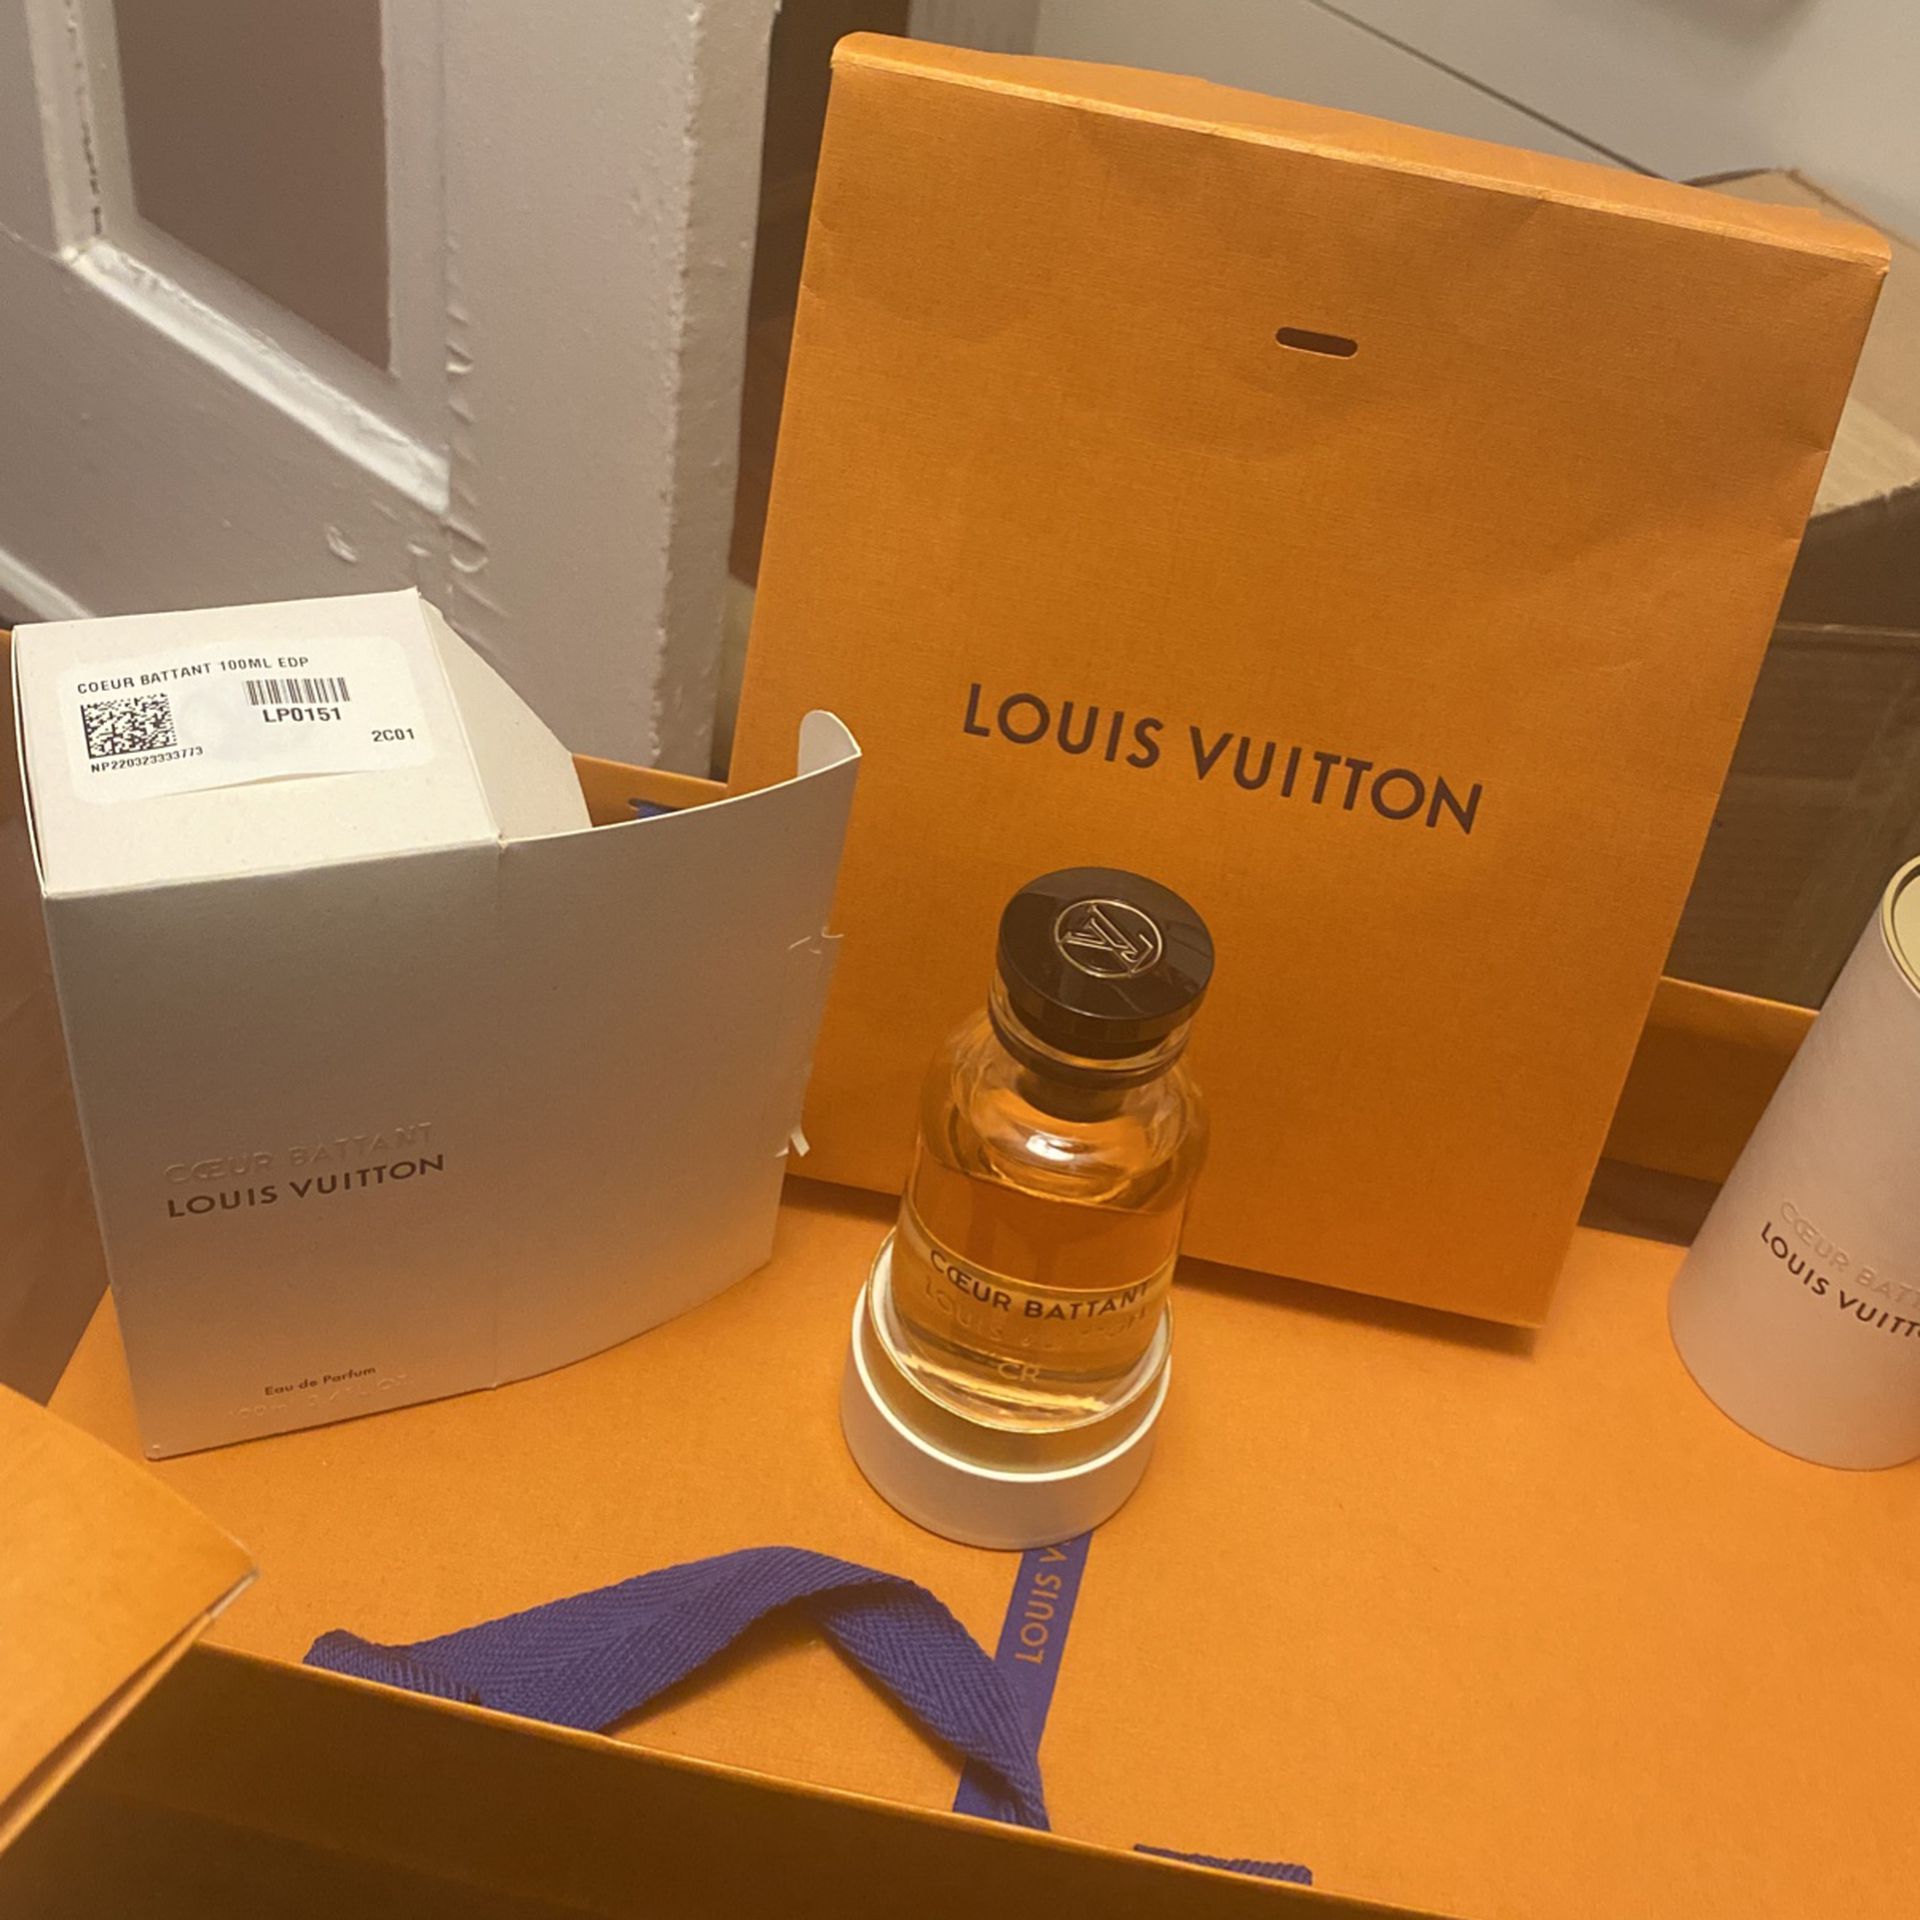 LOUIS VUITTON ROSE DES VENT Perfume woman for Sale in San Diego, CA -  OfferUp